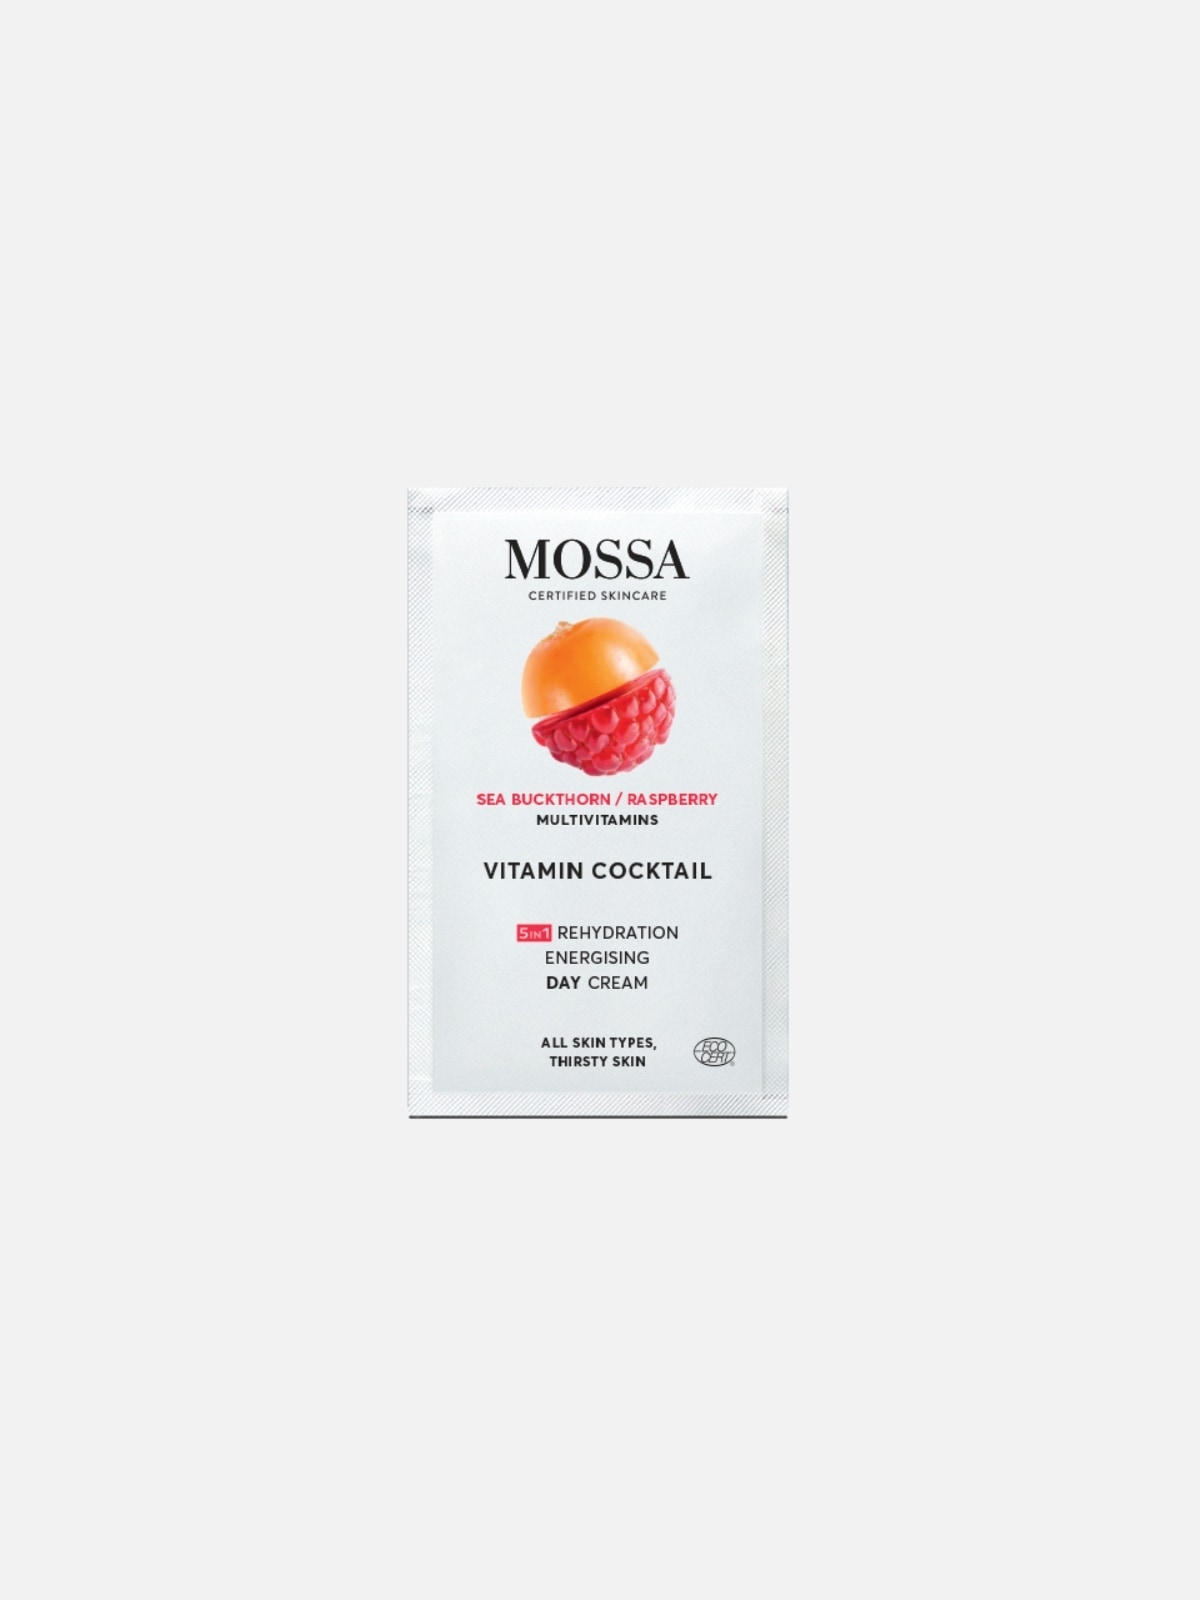 Mossa - Vitamin Cocktail 5in1 Rehydration Energising Day Cream